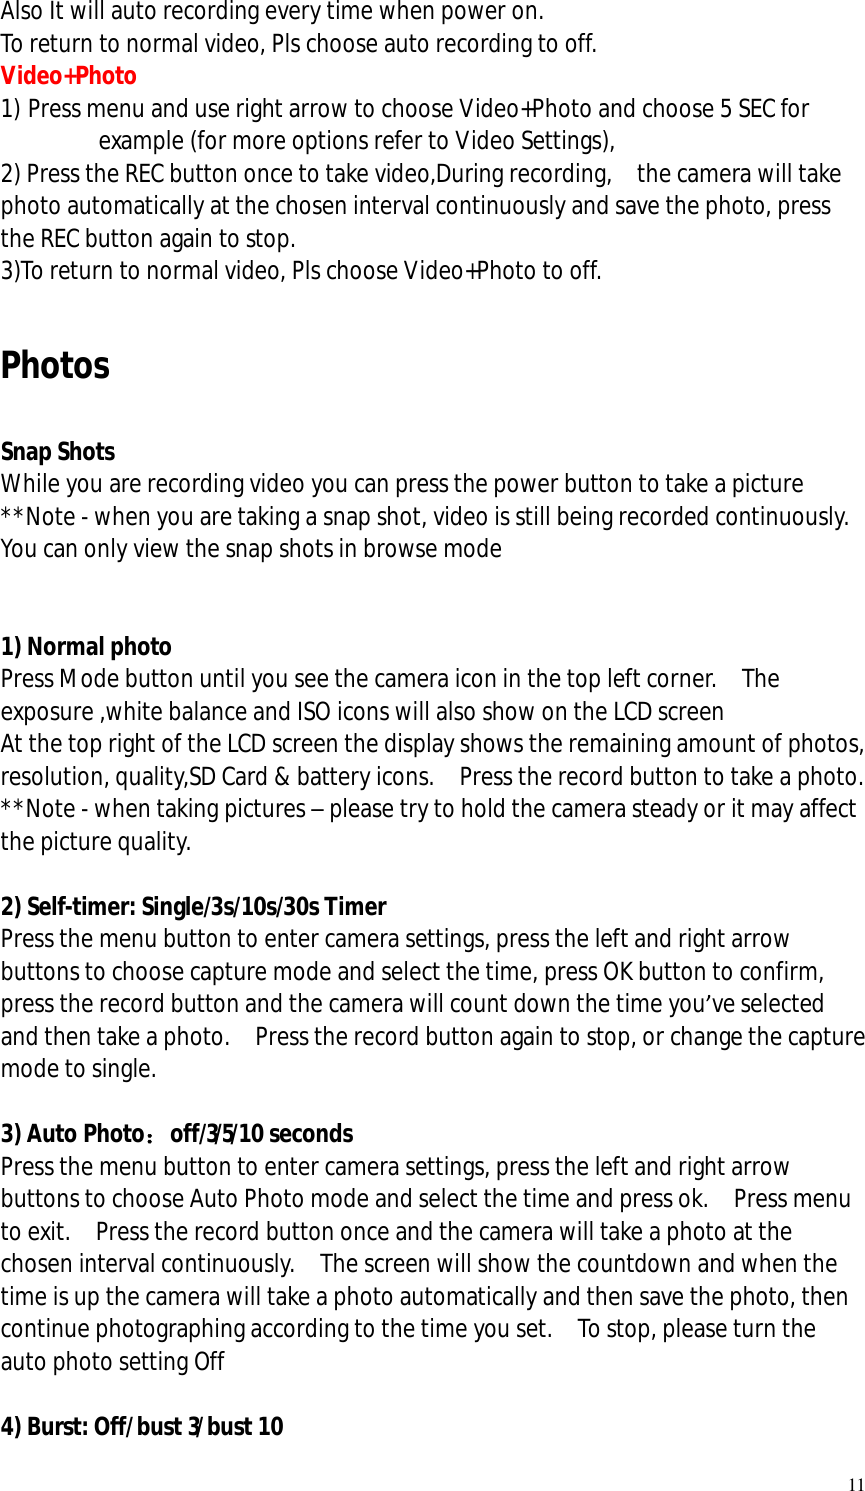   11 Also It will auto recording every time when power on.  To return to normal video, Pls choose auto recording to off.  Video+Photo 1) Press menu and use right arrow to choose Video+Photo and choose 5 SEC for example (for more options refer to Video Settings),  2) Press the REC button once to take video,During recording,  the camera will take photo automatically at the chosen interval continuously and save the photo, press the REC button again to stop.  3)To return to normal video, Pls choose Video+Photo to off.   Photos  Snap Shots While you are recording video you can press the power button to take a picture  **Note - when you are taking a snap shot, video is still being recorded continuously.  You can only view the snap shots in browse mode   1) Normal photo Press Mode button until you see the camera icon in the top left corner.  The exposure ,white balance and ISO icons will also show on the LCD screen At the top right of the LCD screen the display shows the remaining amount of photos, resolution, quality,SD Card &amp; battery icons.  Press the record button to take a photo. **Note - when taking pictures – please try to hold the camera steady or it may affect the picture quality.  2) Self-timer: Single/3s/10s/30s Timer Press the menu button to enter camera settings, press the left and right arrow buttons to choose capture mode and select the time, press OK button to confirm, press the record button and the camera will count down the time you’ve selected and then take a photo.  Press the record button again to stop, or change the capture mode to single.  3) Auto Photo：off/3/5/10 seconds Press the menu button to enter camera settings, press the left and right arrow buttons to choose Auto Photo mode and select the time and press ok.  Press menu to exit.  Press the record button once and the camera will take a photo at the chosen interval continuously.  The screen will show the countdown and when the time is up the camera will take a photo automatically and then save the photo, then continue photographing according to the time you set.  To stop, please turn the auto photo setting Off  4) Burst: Off/bust 3/bust 10  